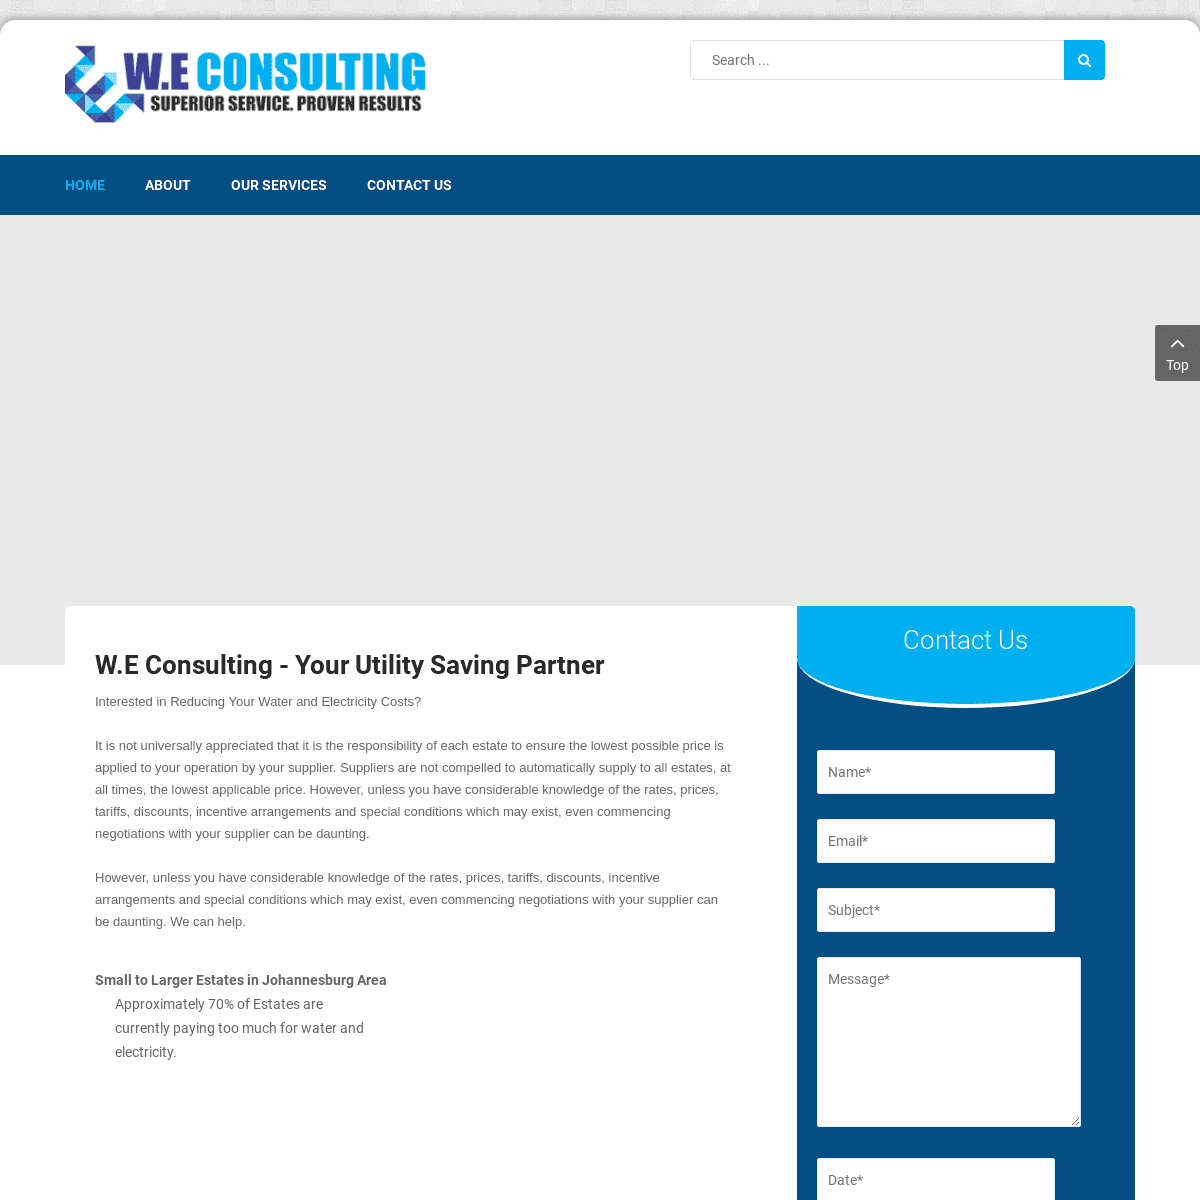 A complete backup of https://utilityconsulting.co.za